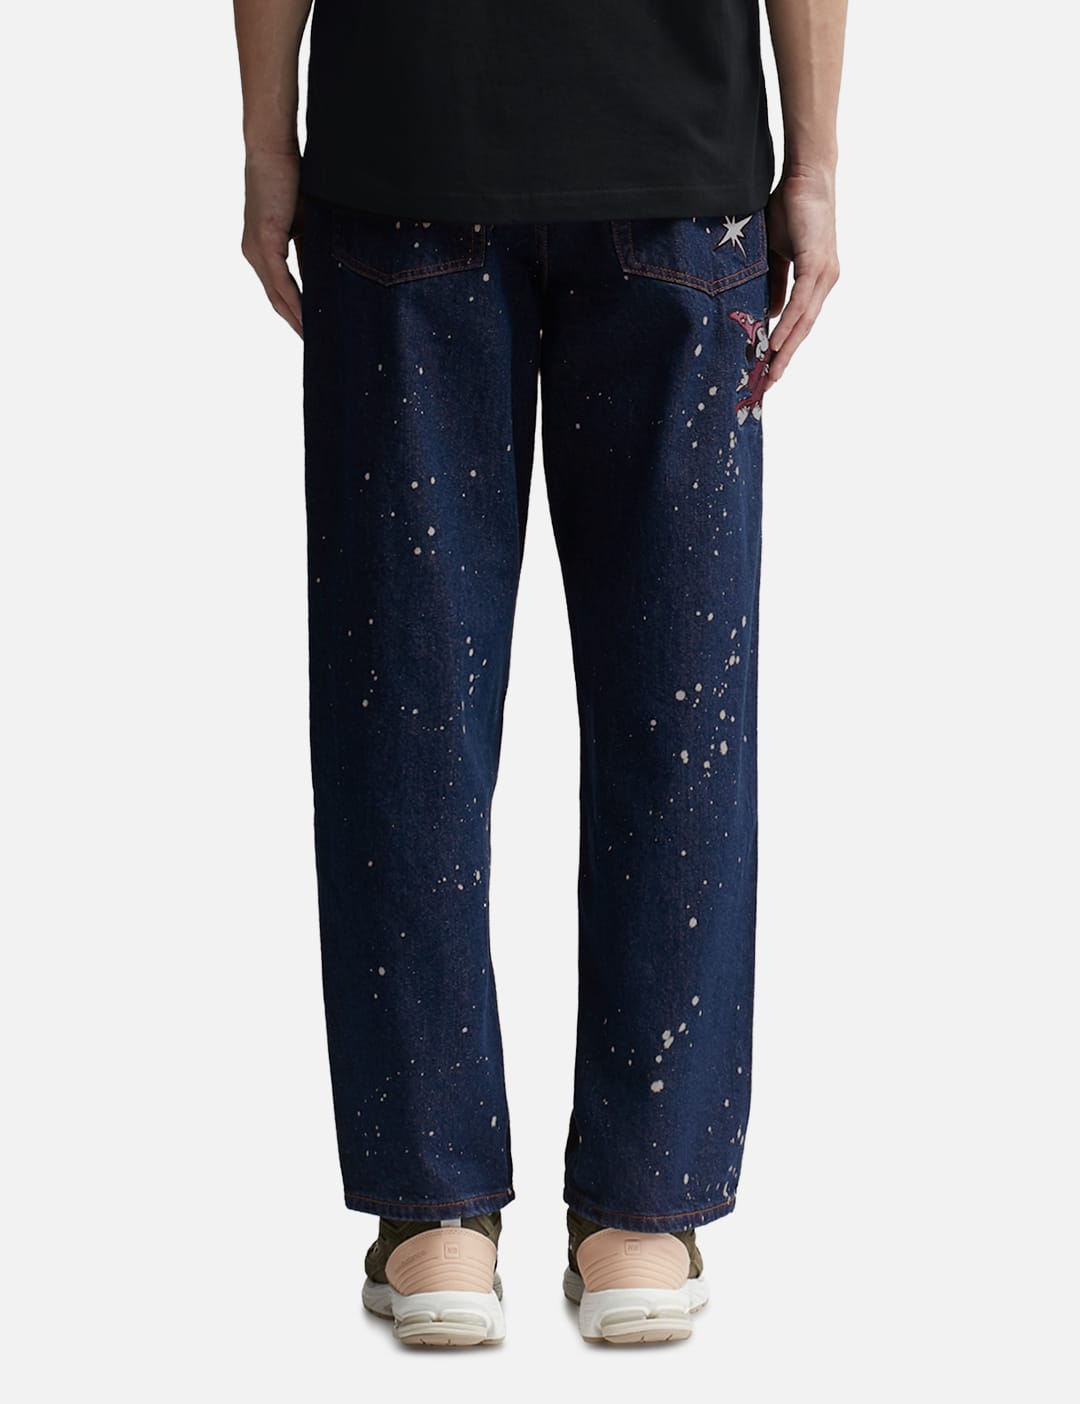 Butter Goods - Fantasia Baggy Denim Jeans | HBX - Globally Curated